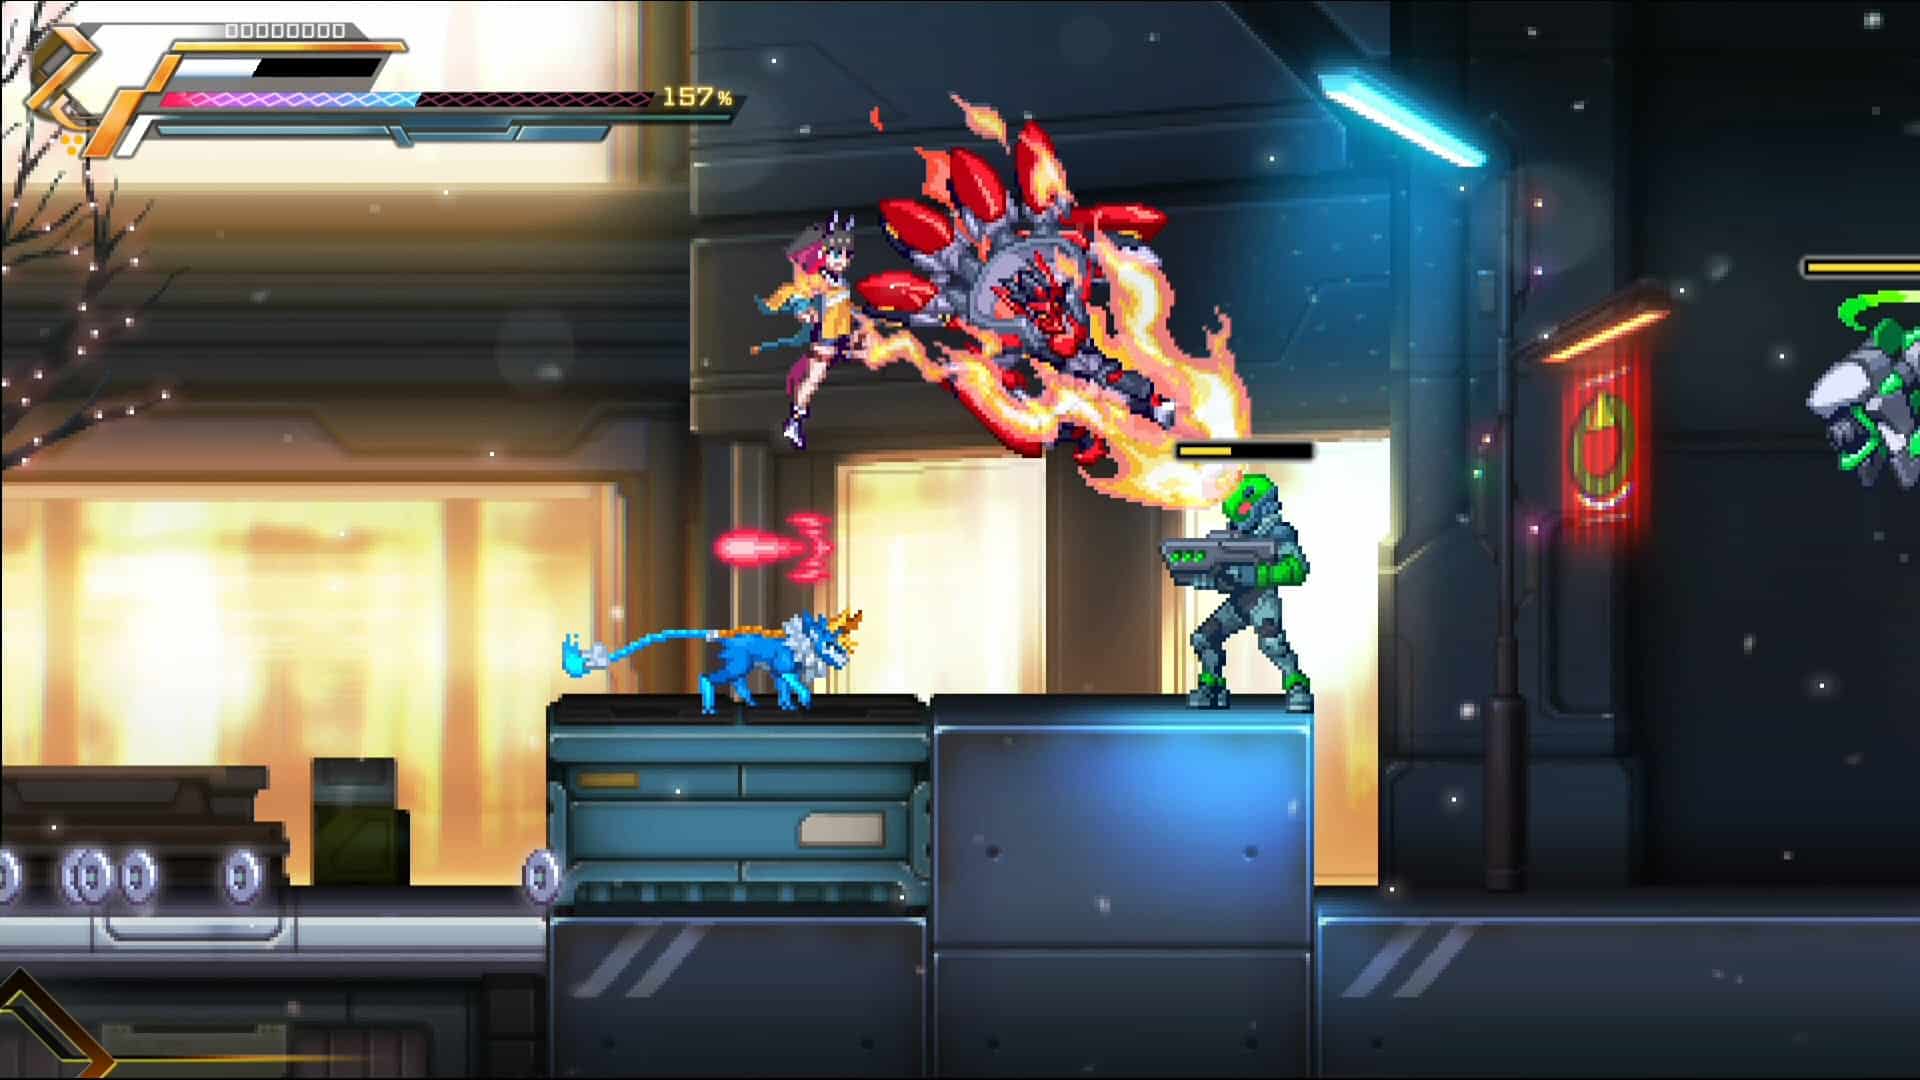 Azure Striker Gunvolt 3, - Azure Striker - Gunvolt 3, Armed Blue: Gunvolt 3, Armed Blue: Gunvolt 3 Gibs, Switch, Nintendo Switch, release date, game overview, Japan, pre-order now, price, screenshots, features, trailer, Asia, Inti Creates